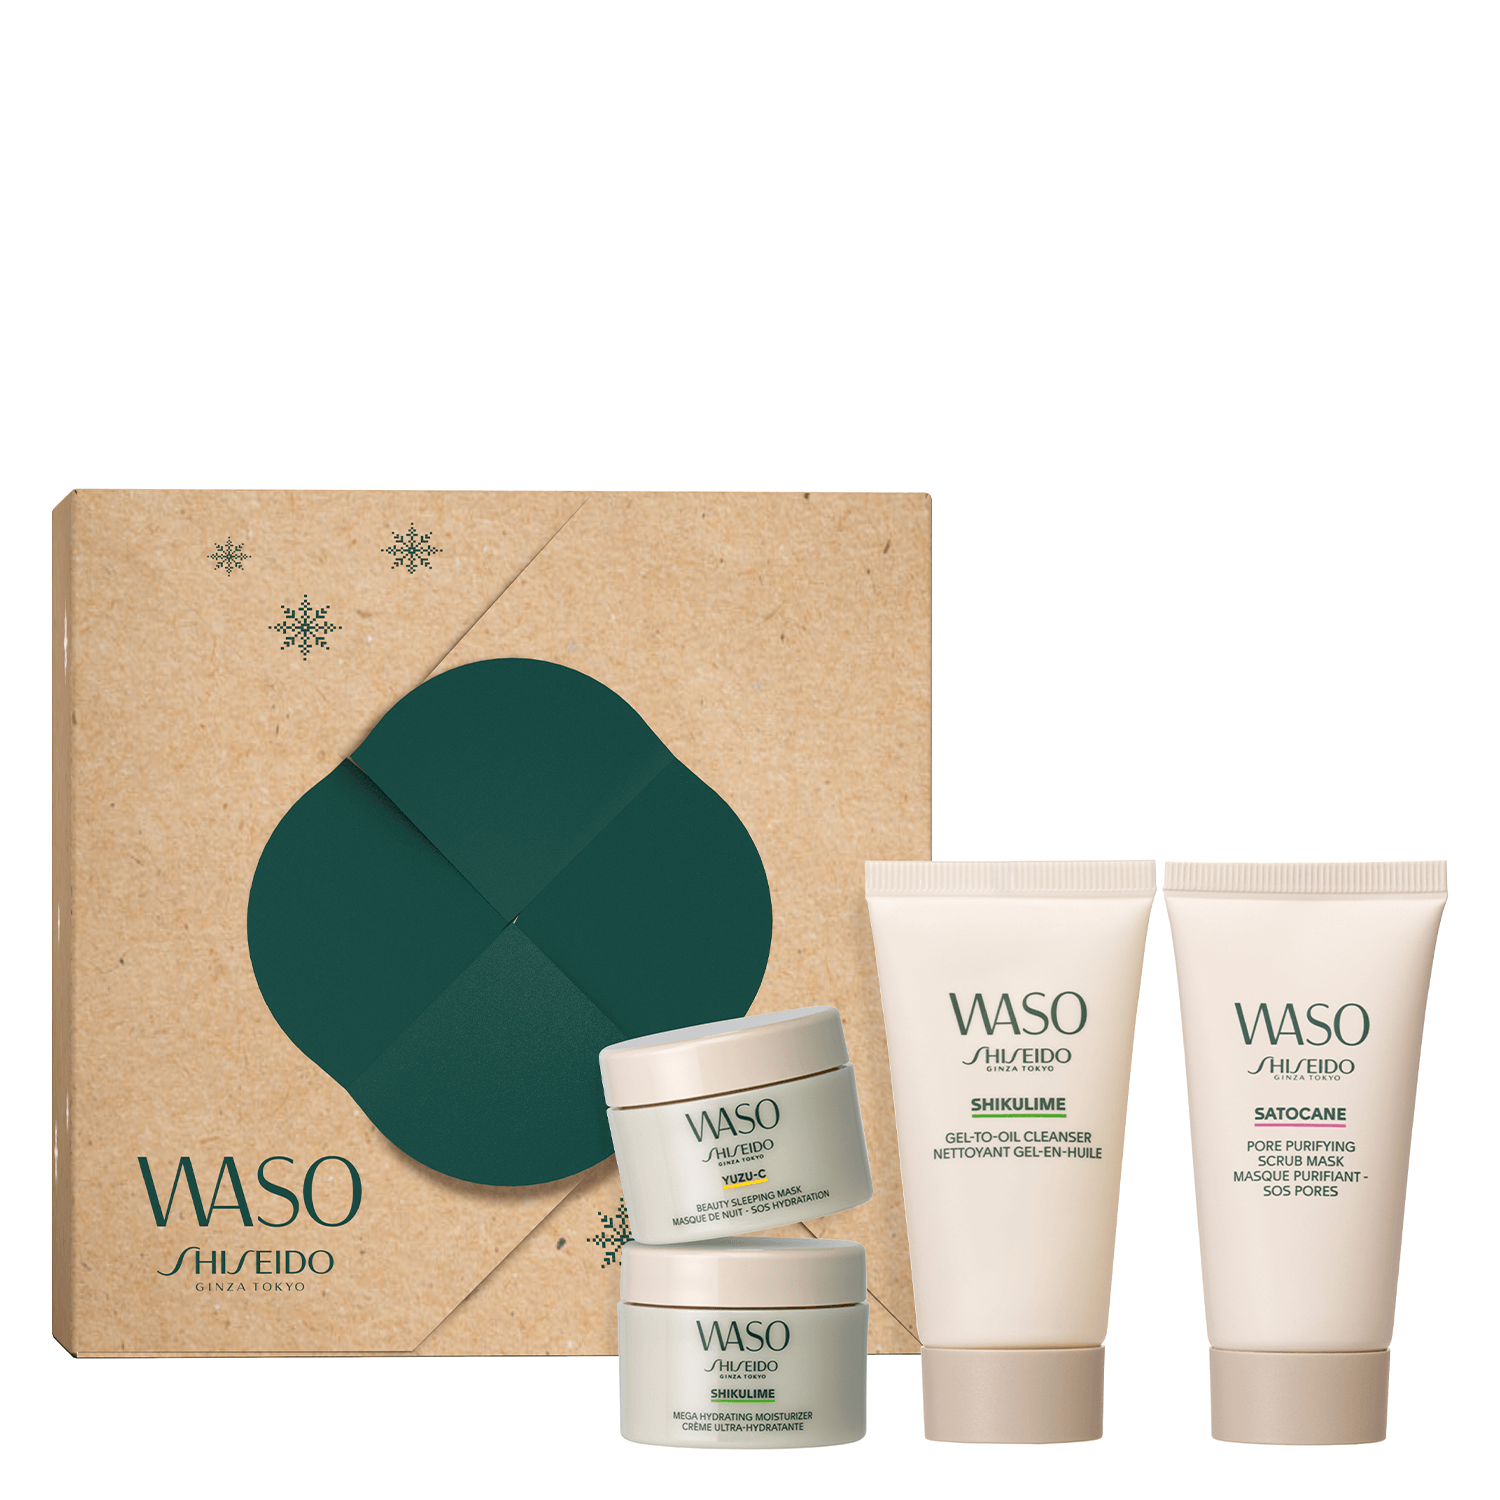 Product image from Shiseido Specials - Waso Holiday Kit